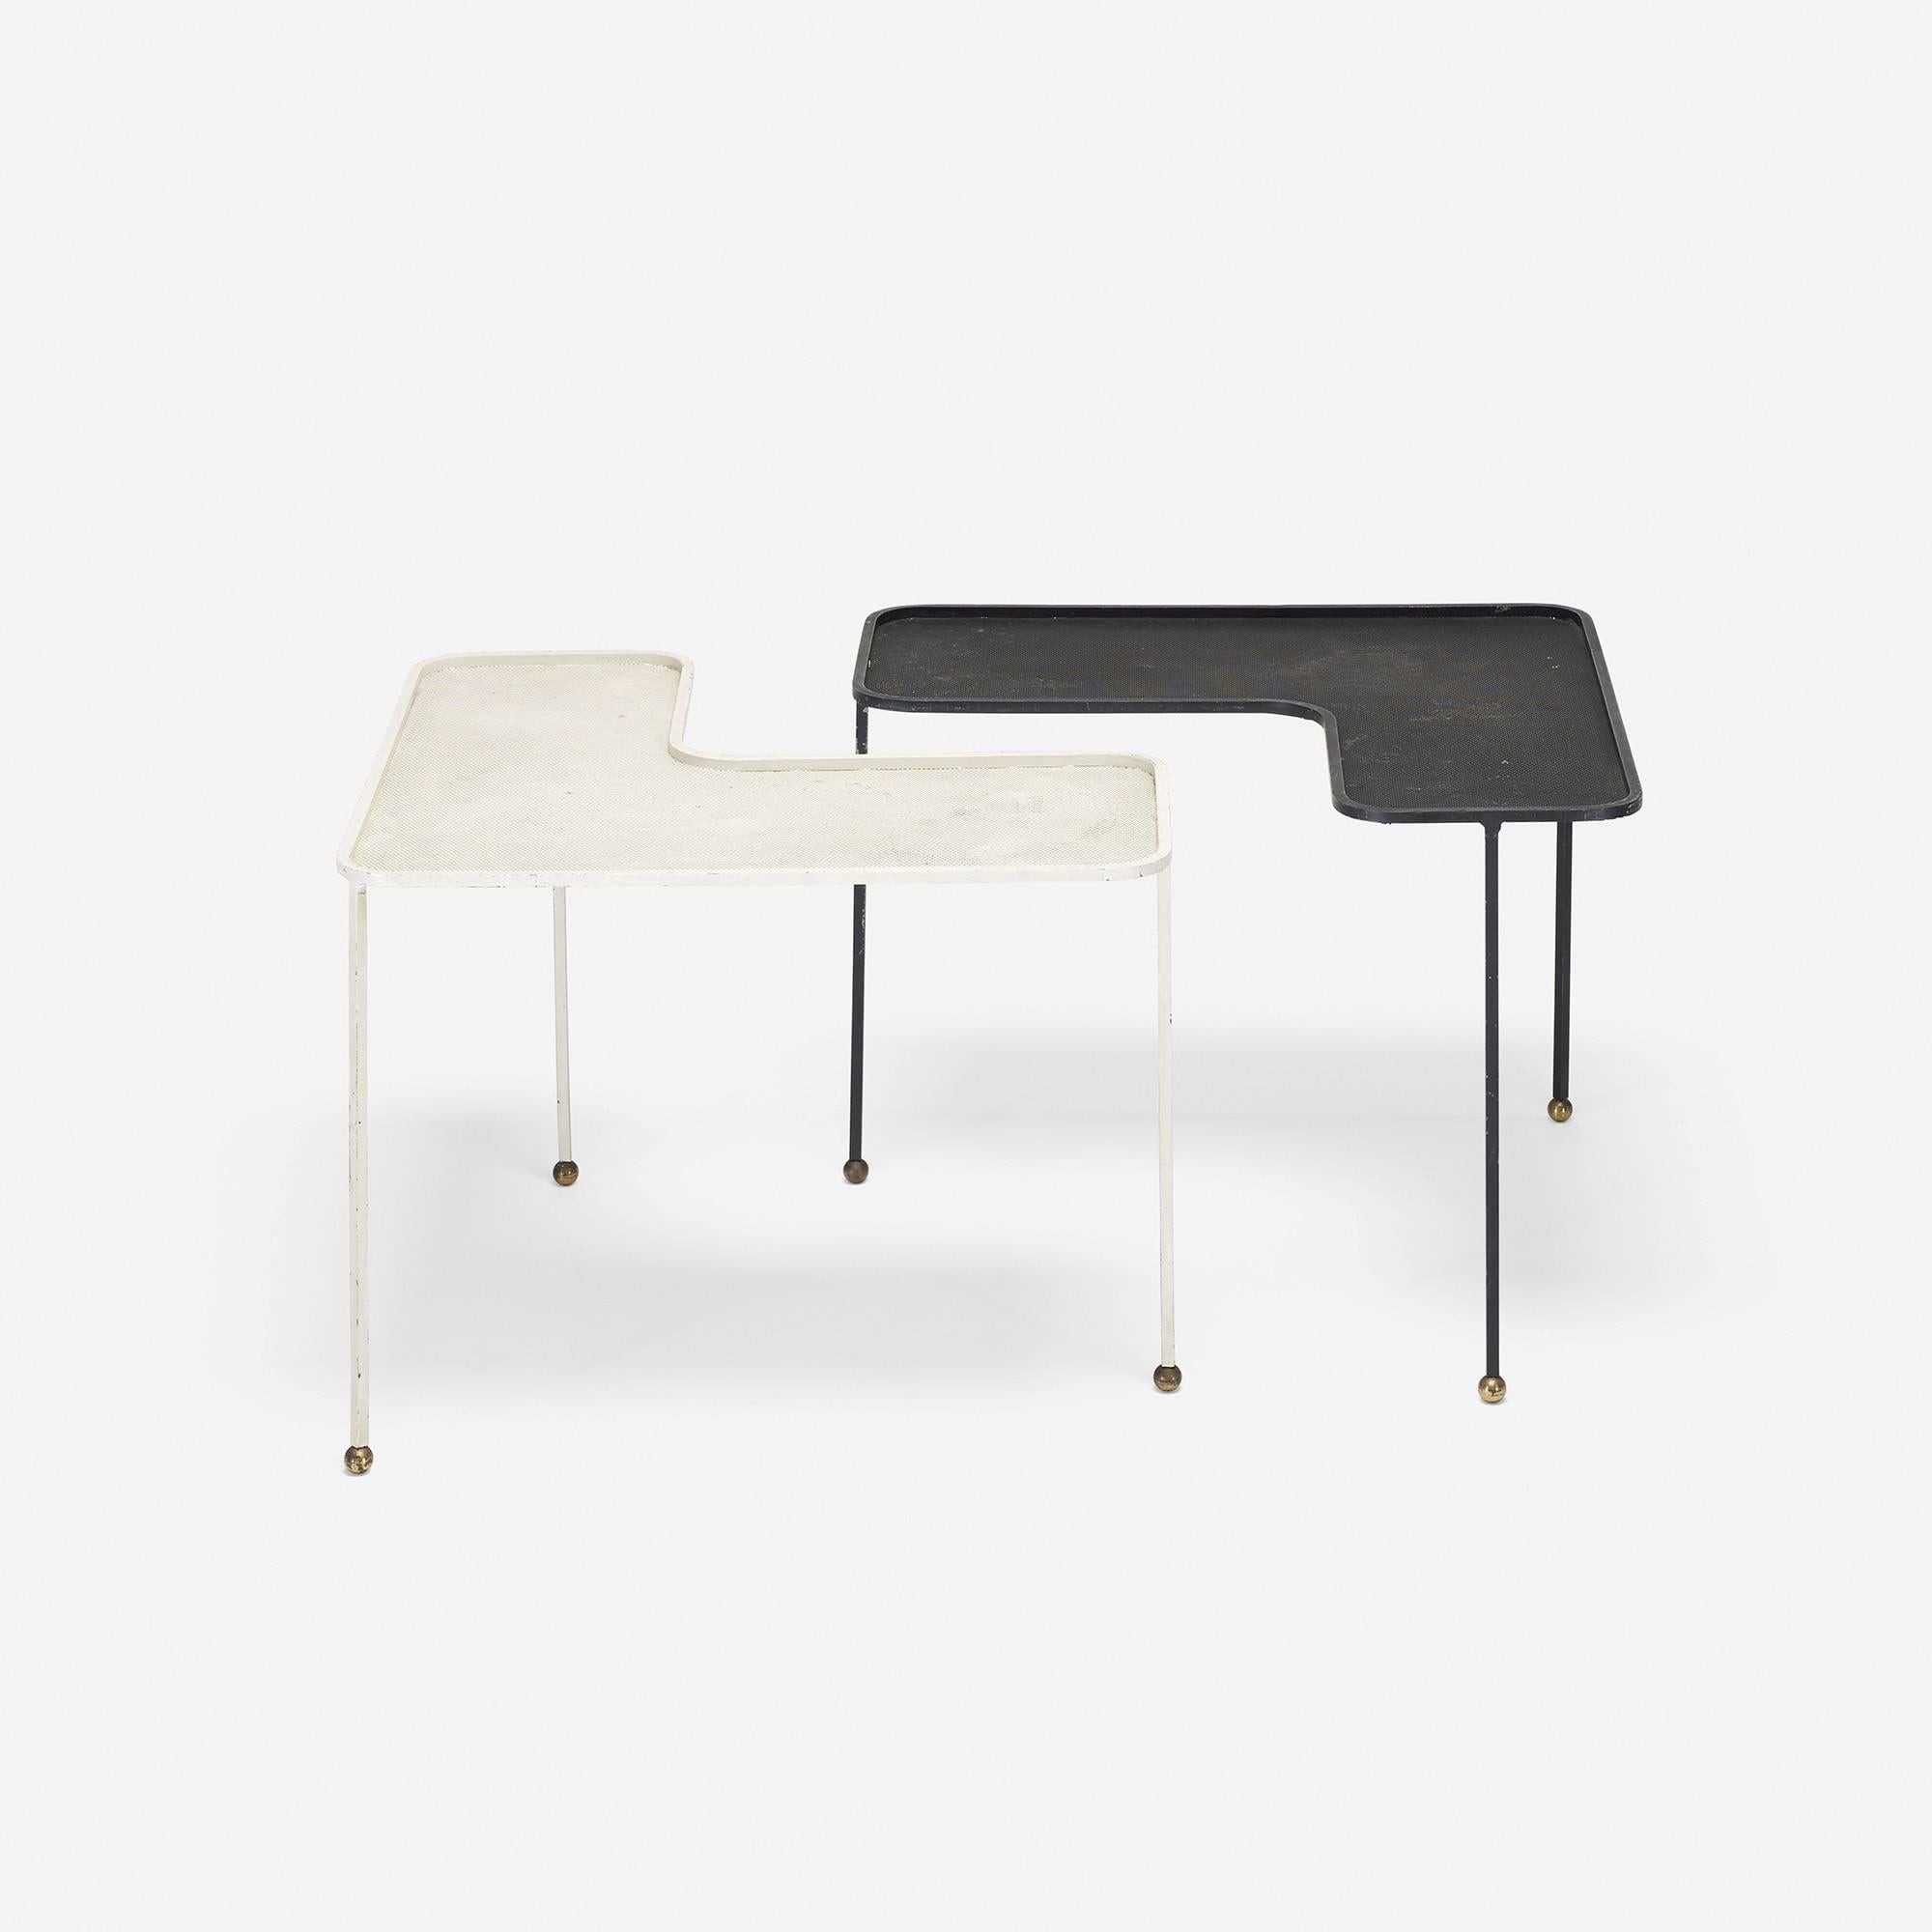 Domino tables, pair by Mathieu Matégot for Atelier Matégot.